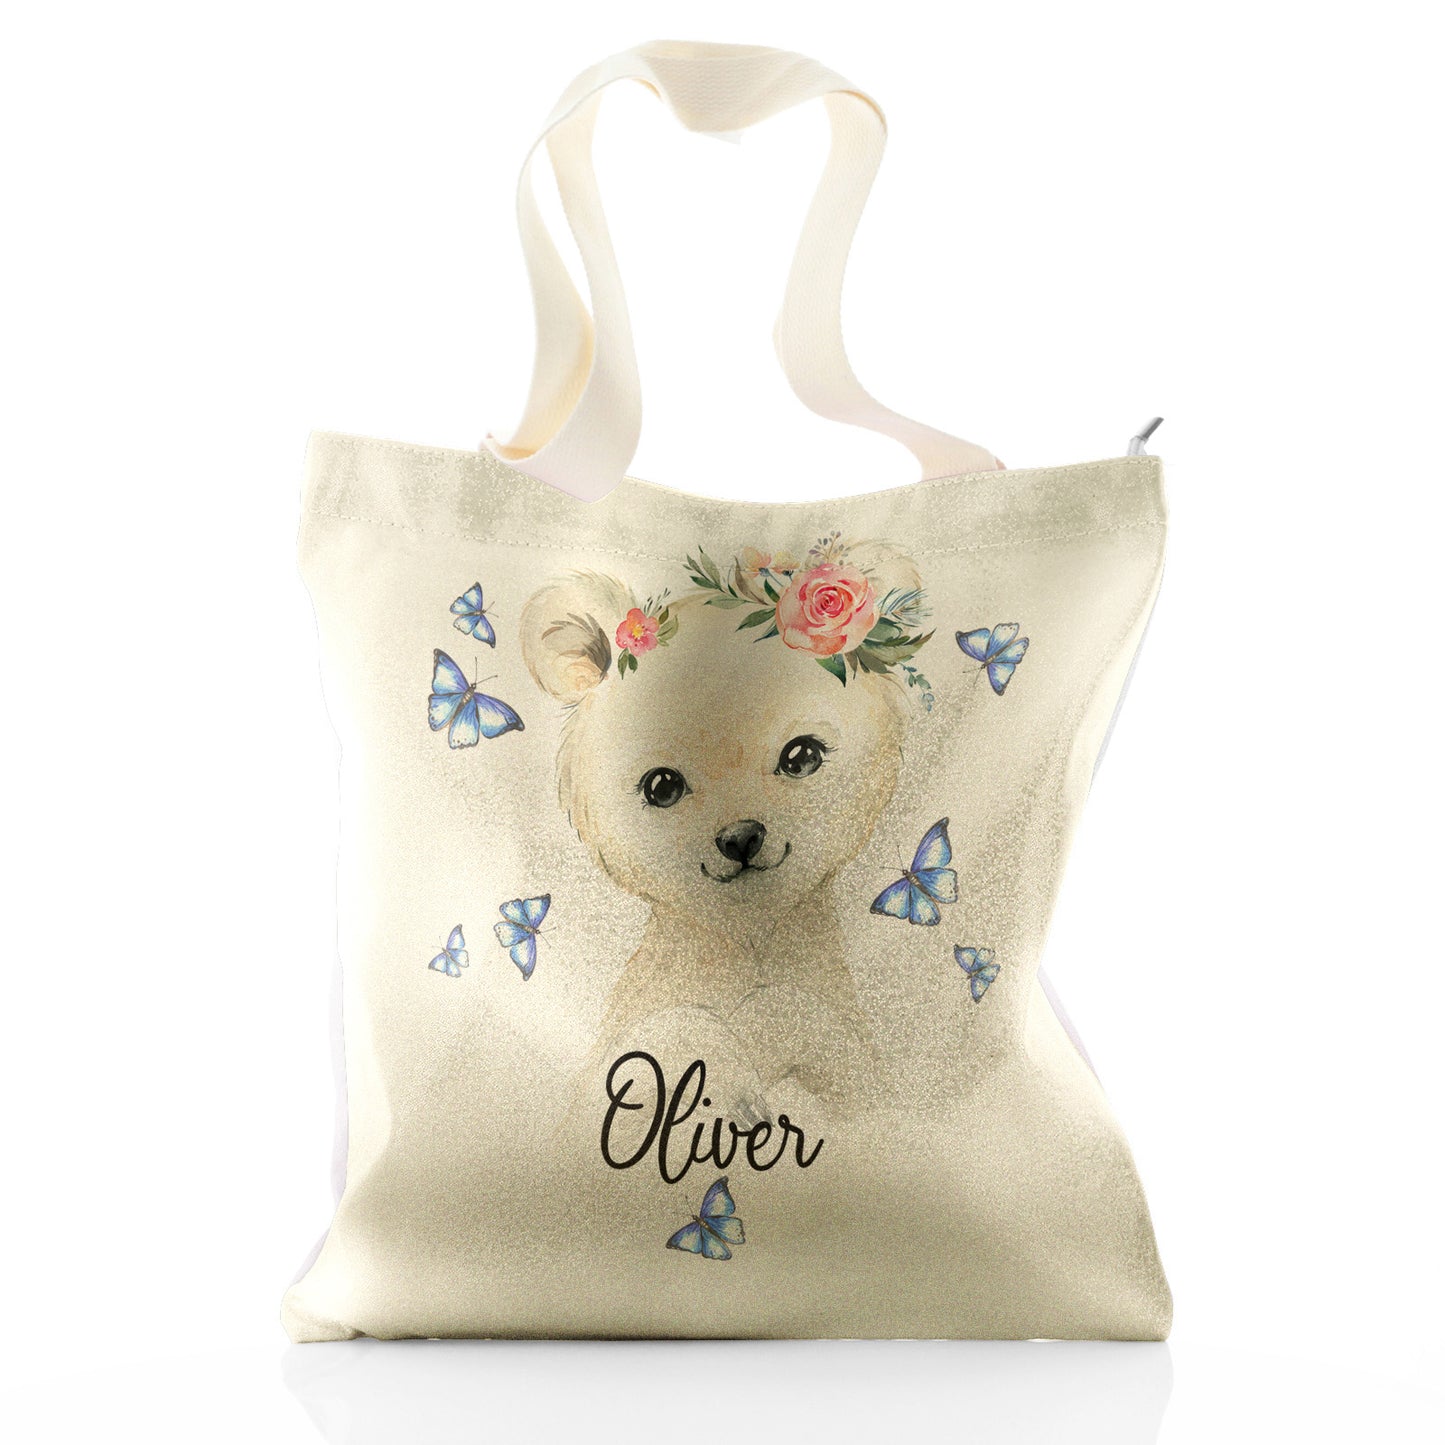 Personalised Glitter Tote Bag with White Polar Bear Blue Butterflies and Cute Text